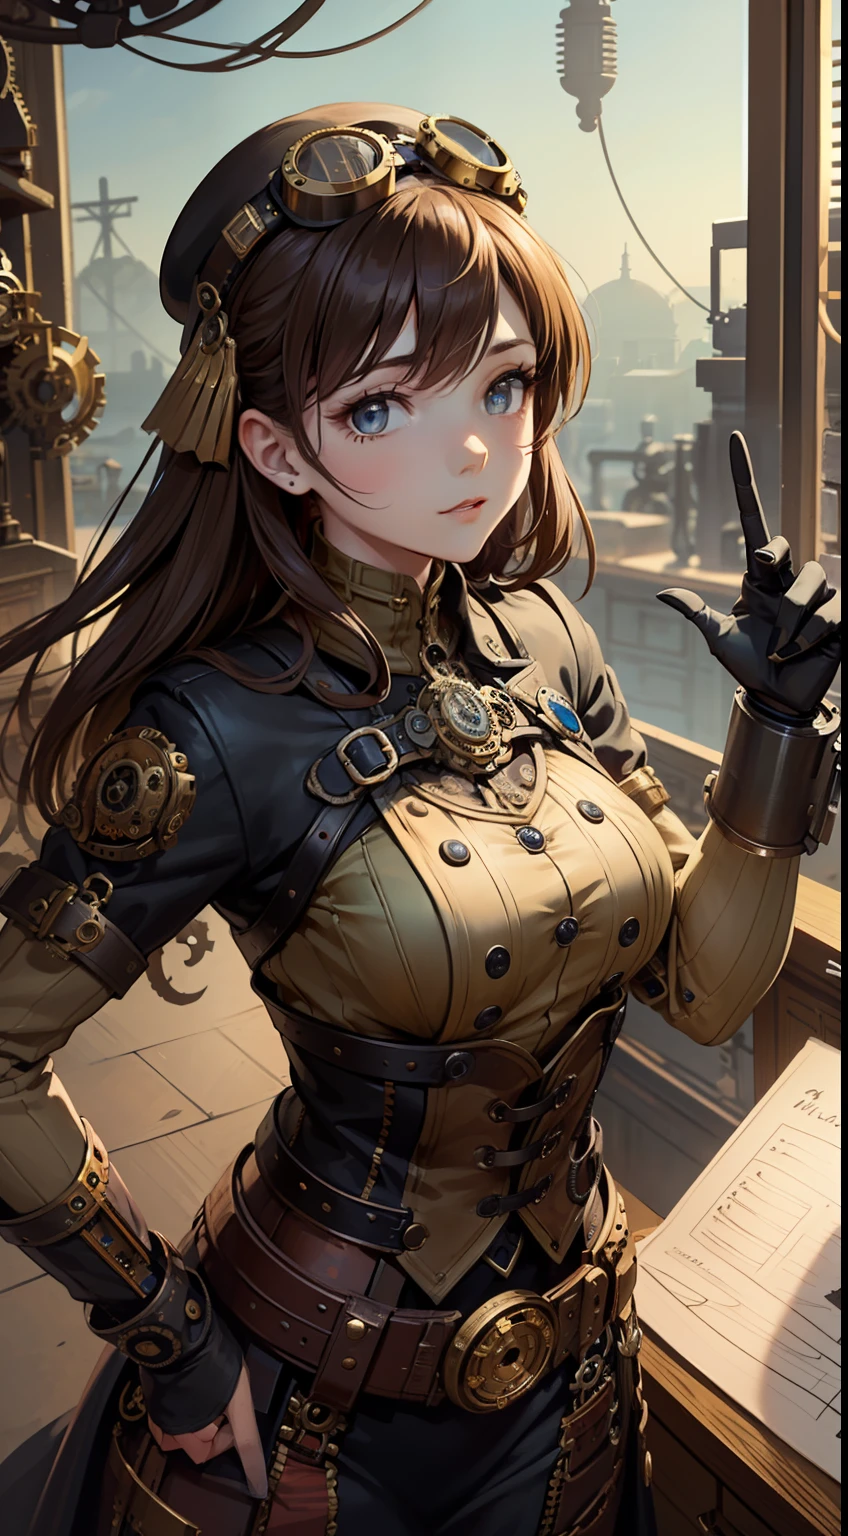 ((masterpiece)), (1girl), (steampunk theme:1.5), (mechanical elements:1.3), (goggles:1.2), (inventor:1.1), (engaged expression), (active pose), ((richly detailed workshop background)), (assorted gears:1.2), (steam-powered machinery), (blueprints),(flickering gaslights:1.1), (clockwork creations),(innovative:1.3),(brass and copper tones)

In a world of steampunk and innovation, a talented female inventor stands within her bustling workshop. She dons goggles, which rest on her forehead, highlighting her inquisitive eyes filled with determination. Her outfit is adorned with mechanical elements and brass accents, reflecting her passion for invention. She assumes an active pose, one hand adjusting a complex gear system while the other sketches out new ideas on a piece of parchment.